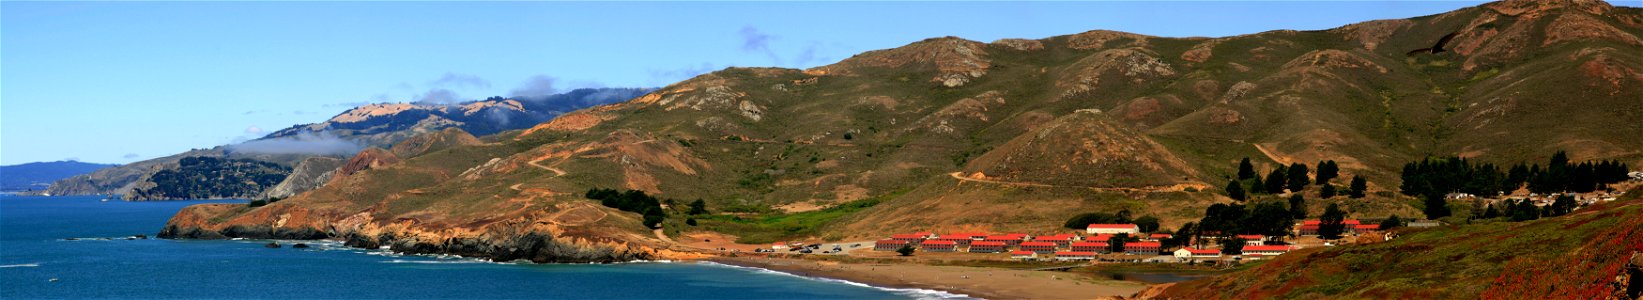 Fort Cronkhite and Rodeo Beach. The bird in the upper right corner is Turkey Vulture (Cathartes aura) photo